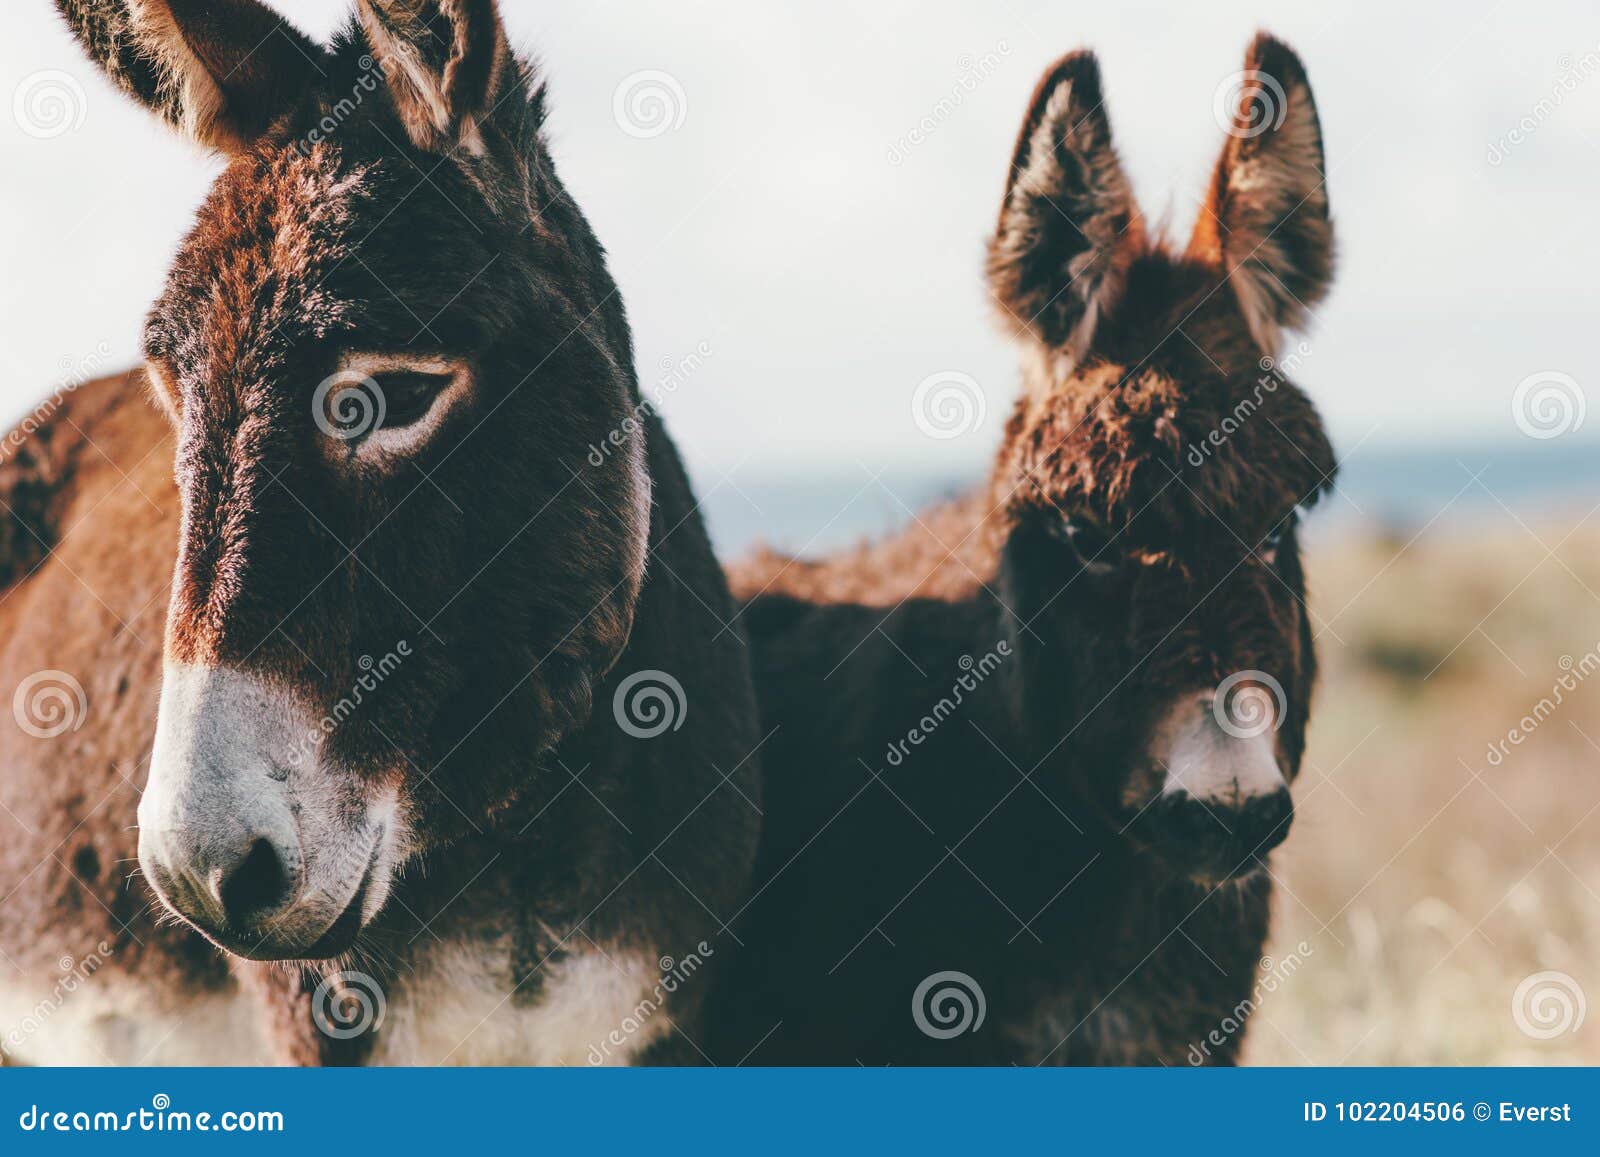 donkeys farm animal brown colour close up cute funny pets